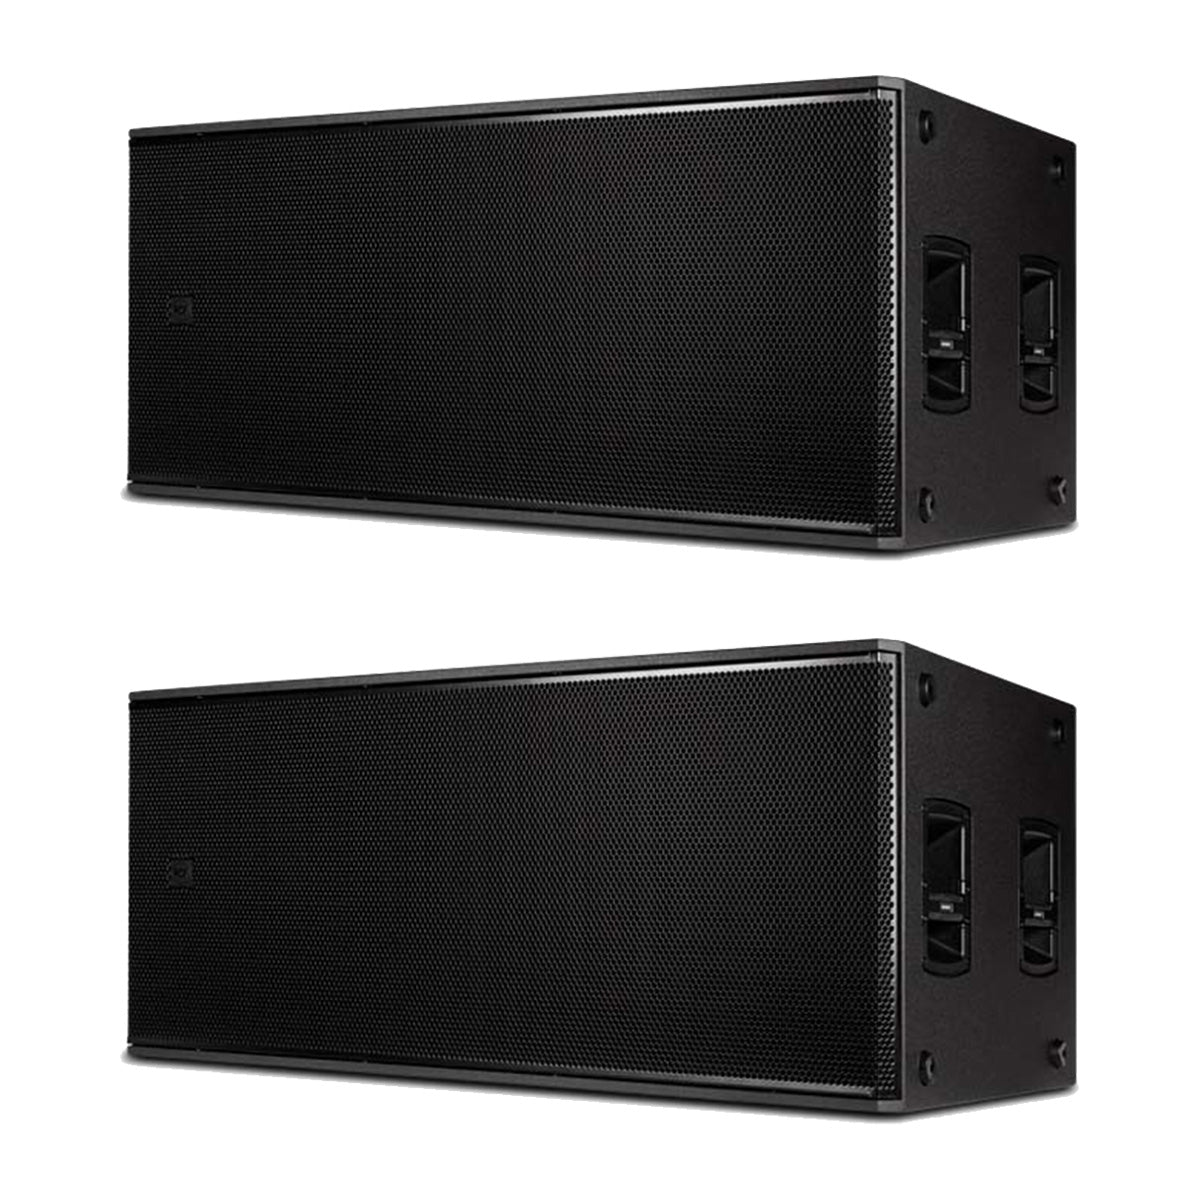 RCF SUB 8008-AS Double 18" Active Subwoofer (Pair)